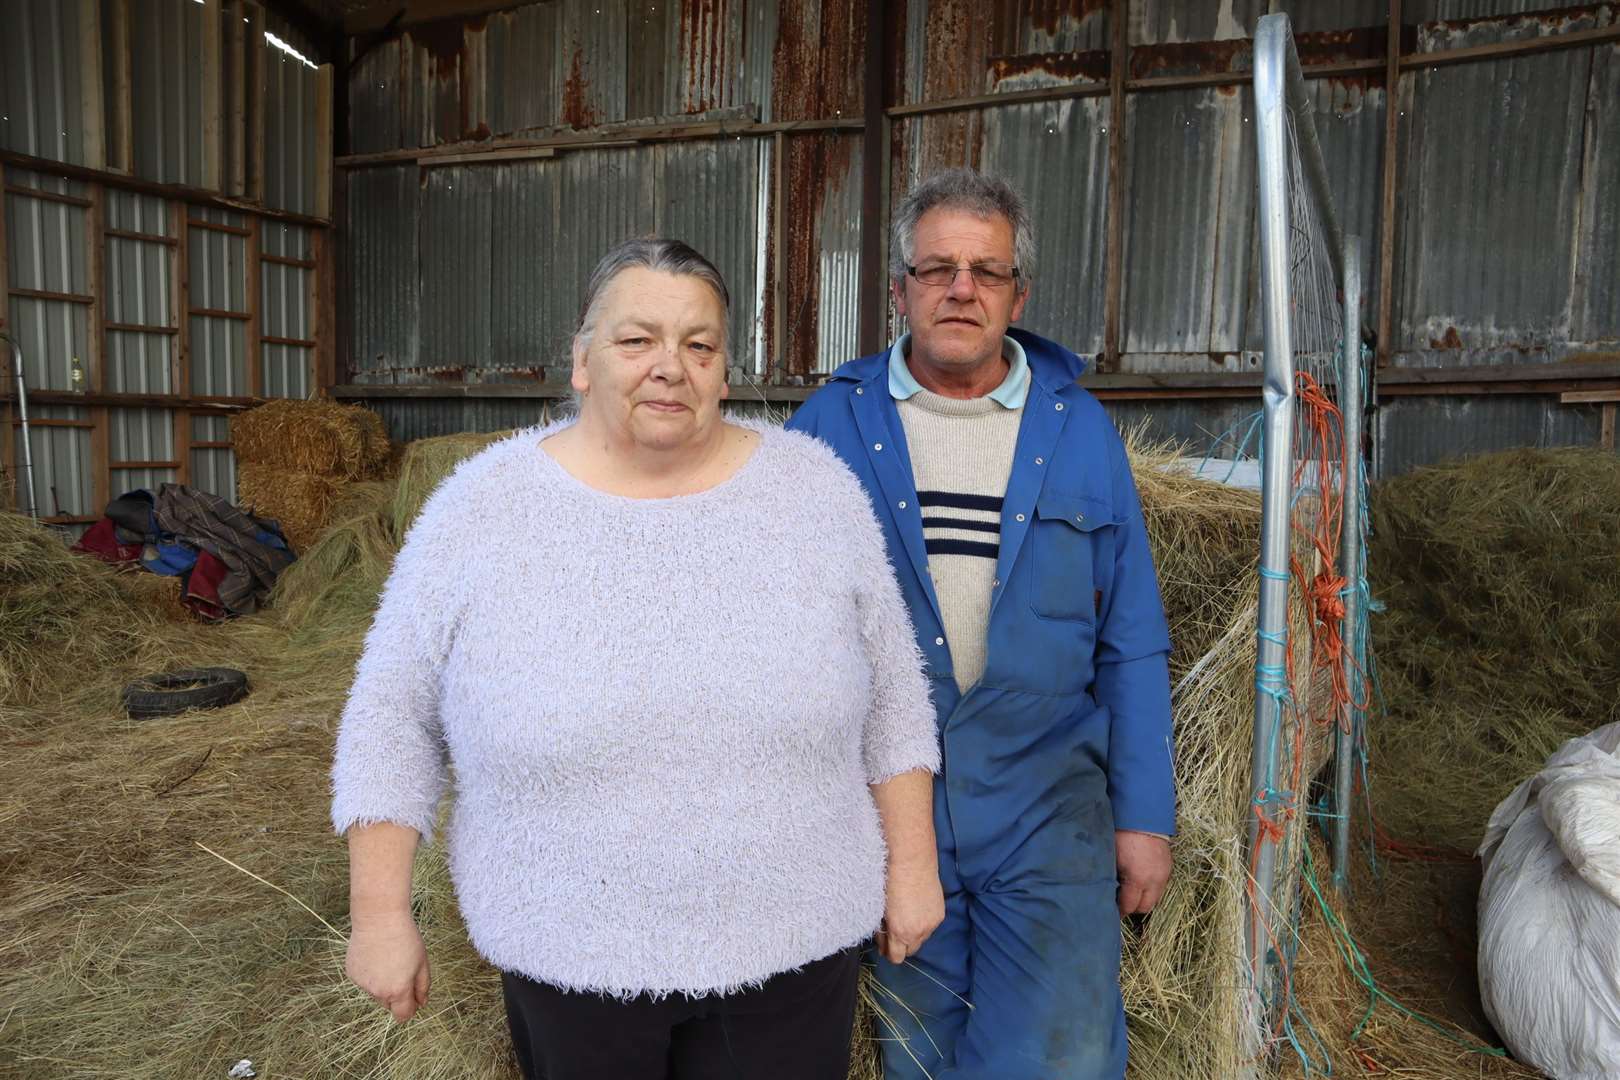 Karen and David Mosdell were preparing for Party on the Farm at Danley Marshes Farm on the Isle of Sheppey